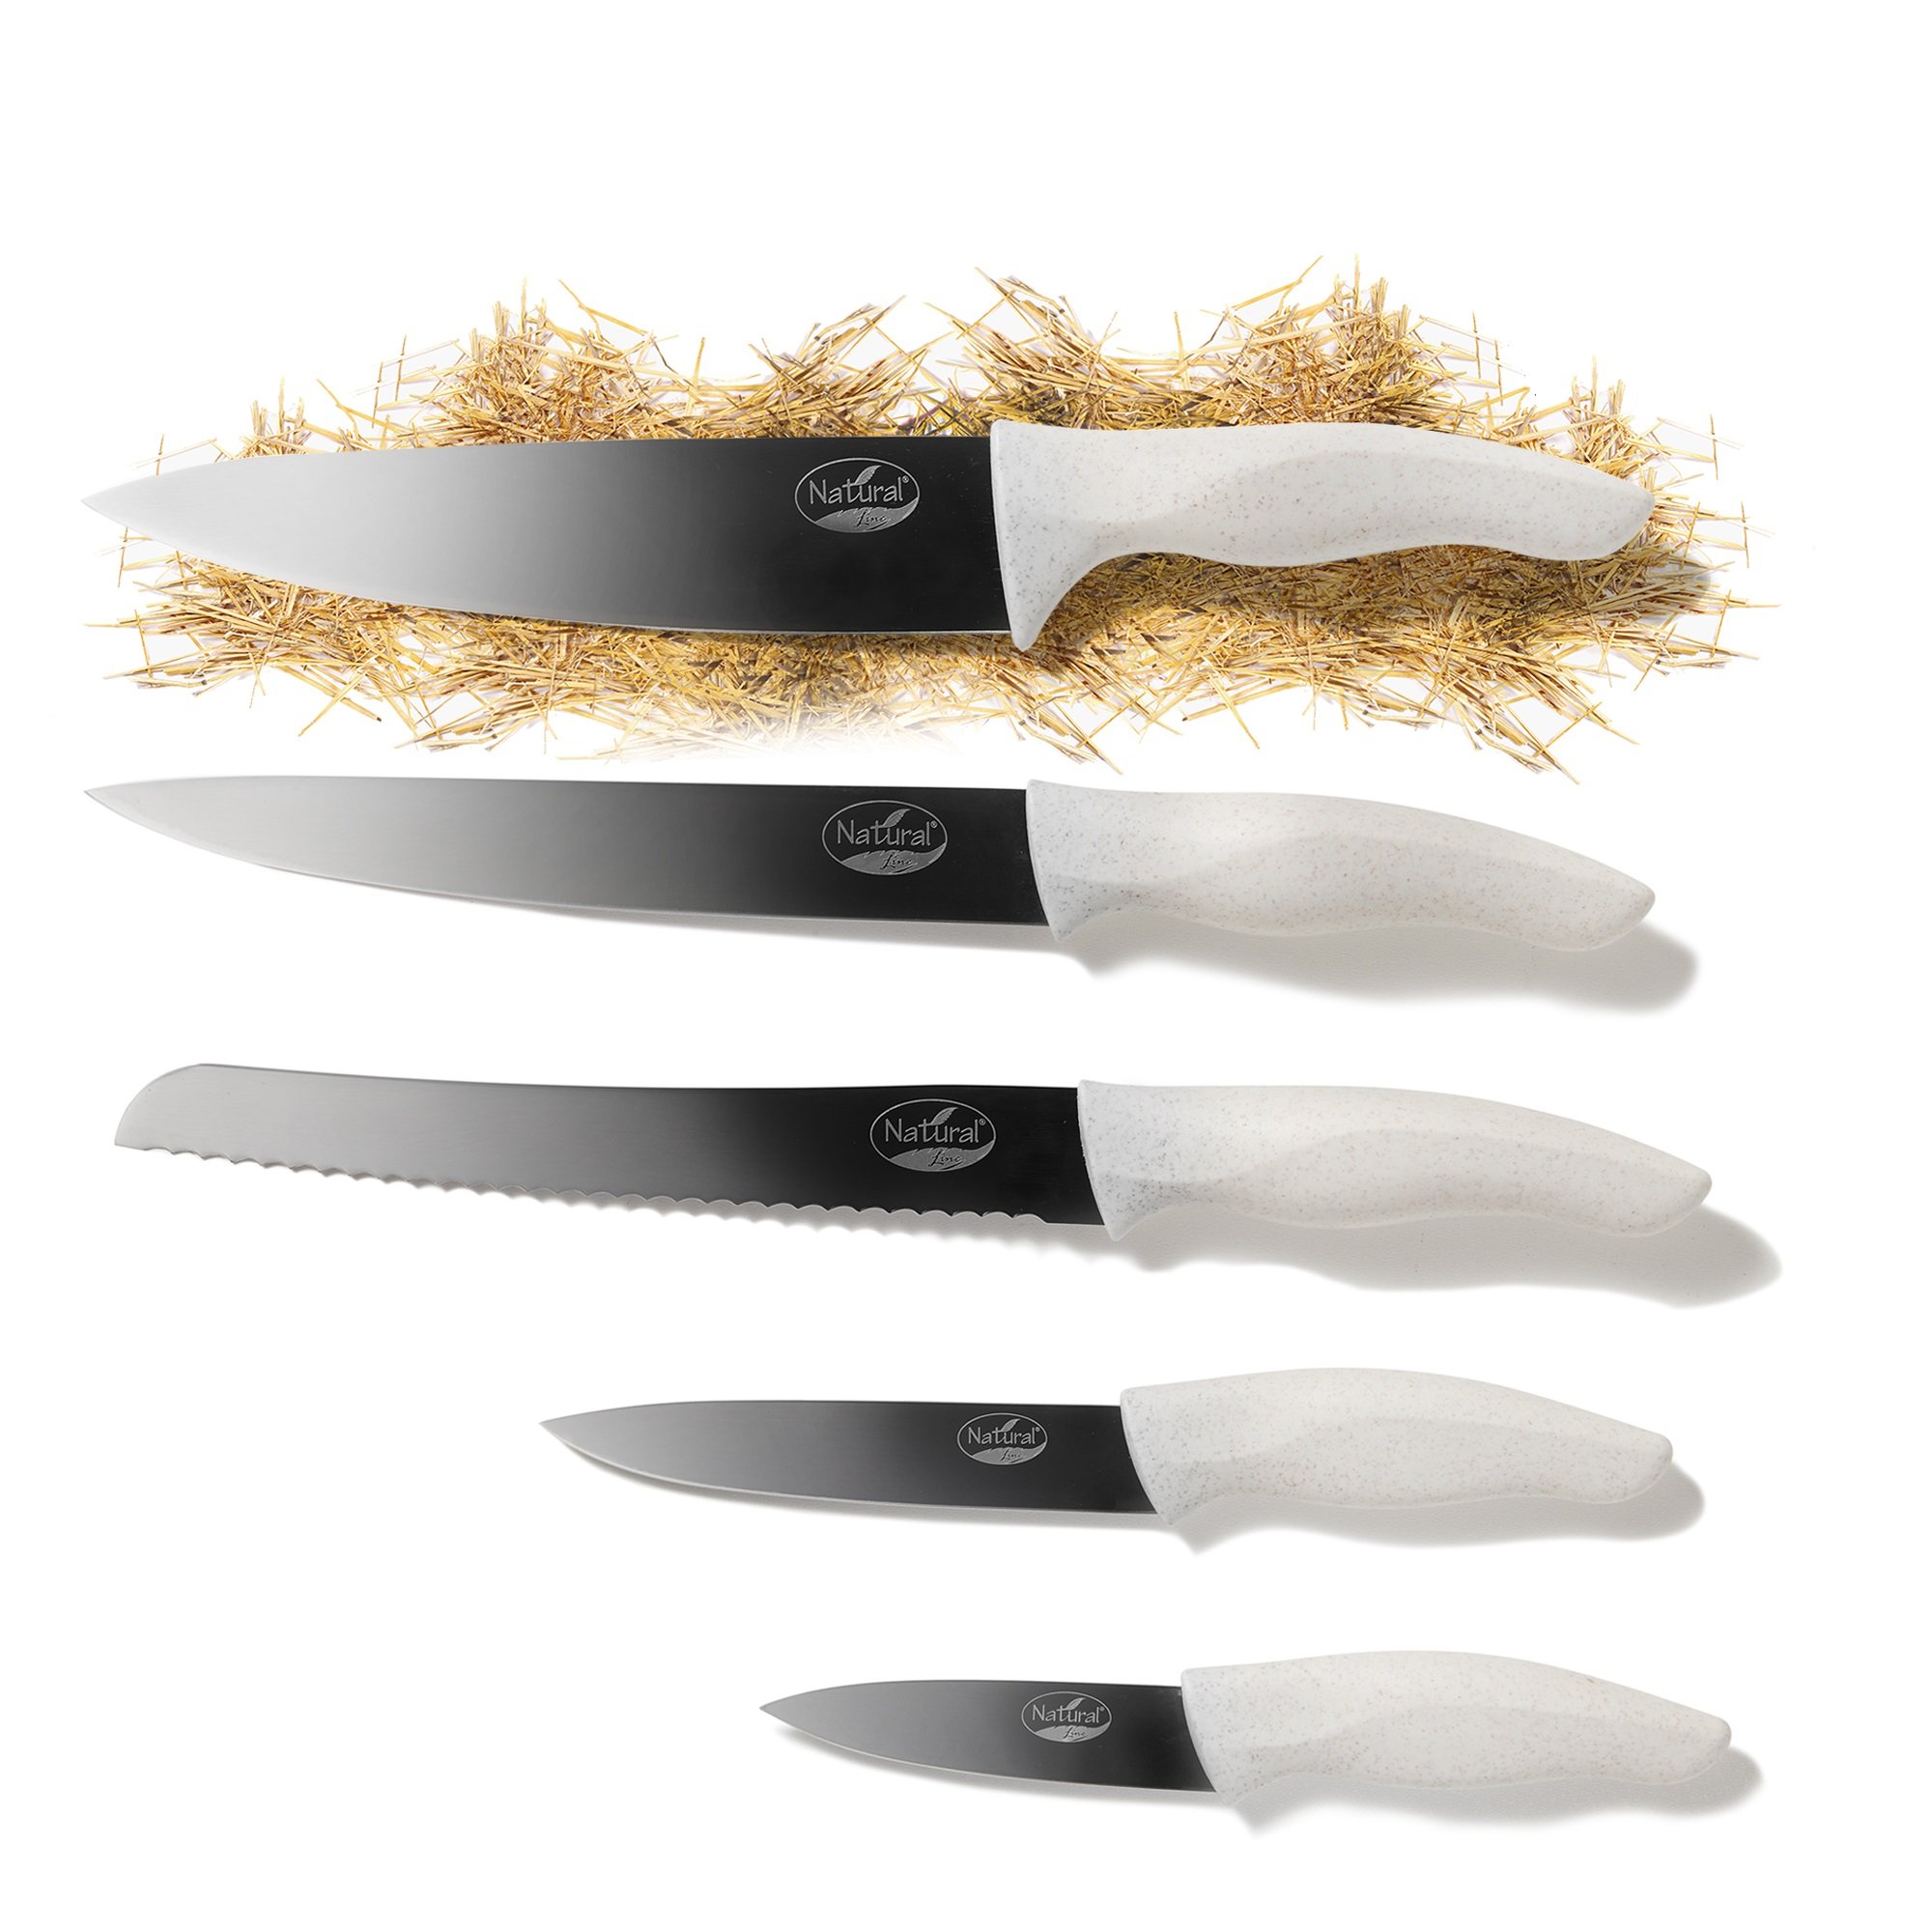 Natural Line® stainless steel knife set, 5 pcs., with folding magnetic knife block, with handles made of straw